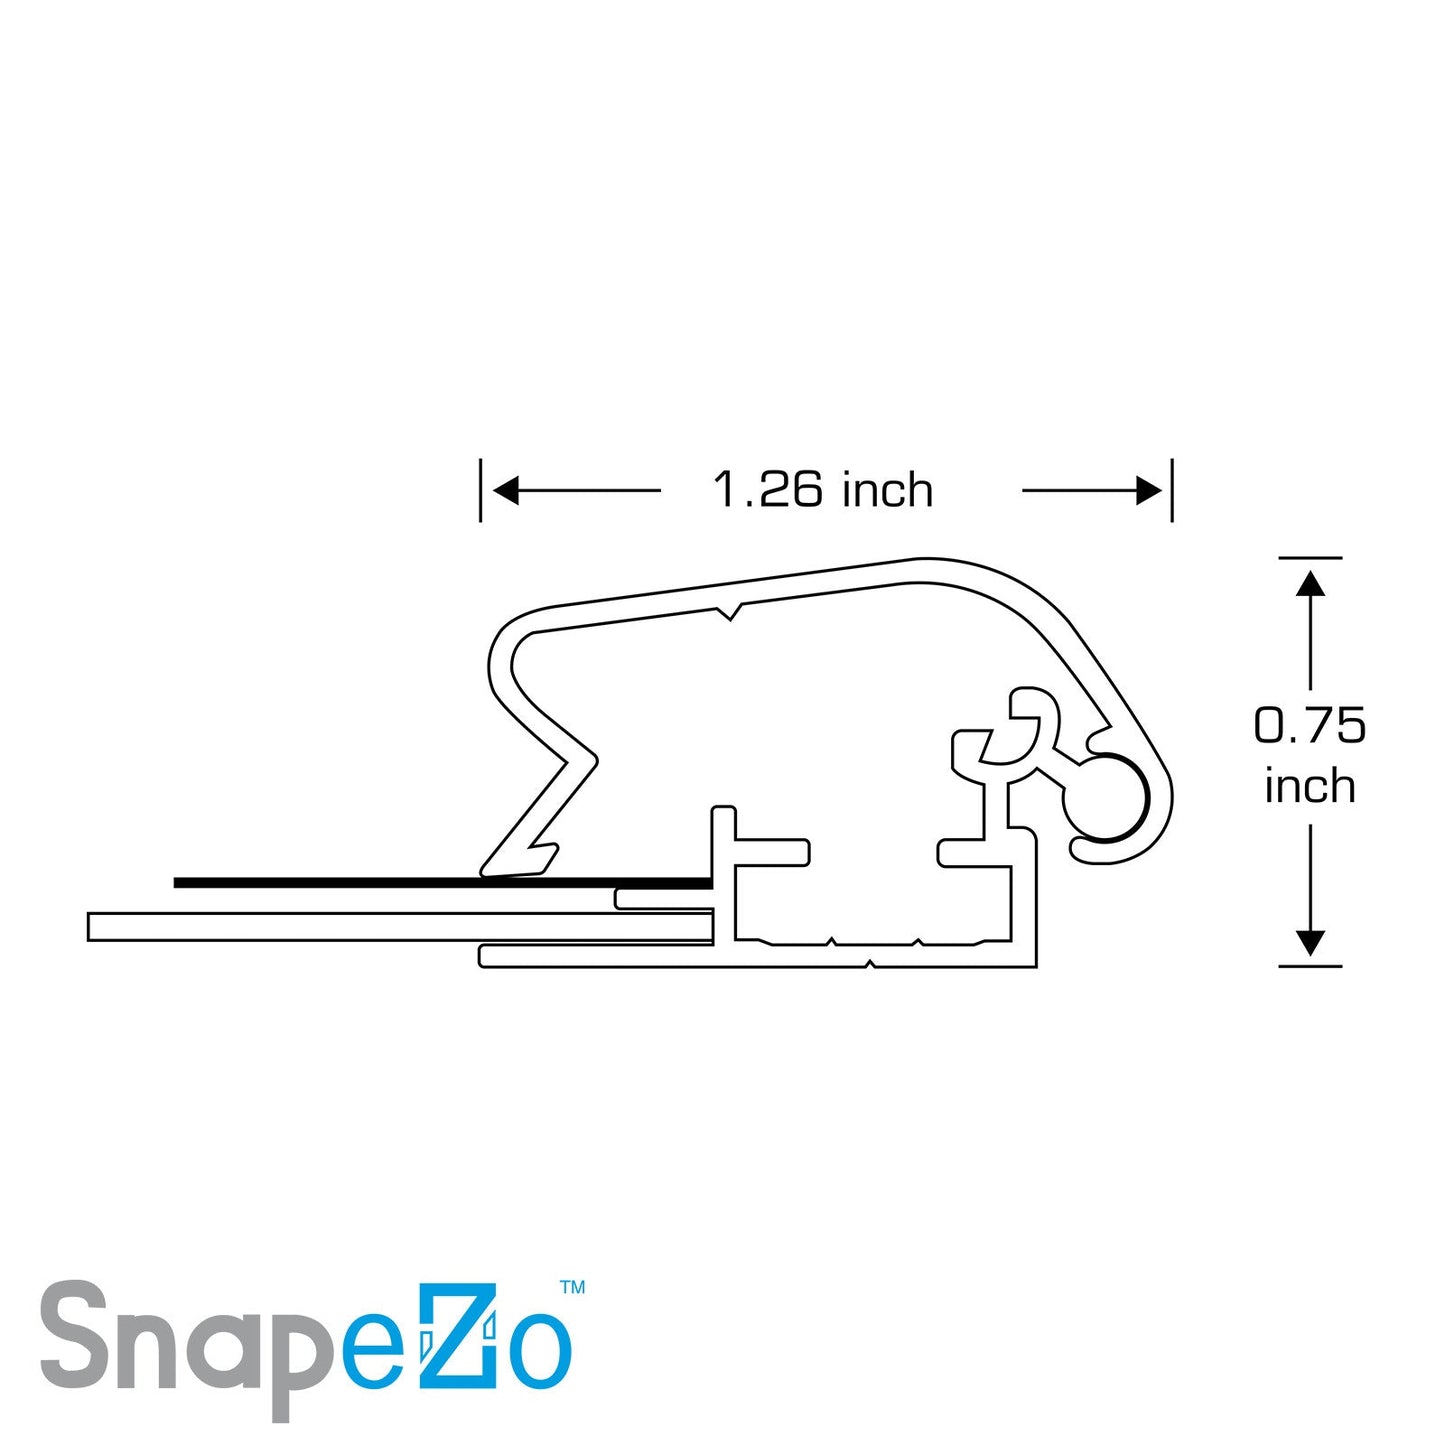 11x17 SnapeZo® Silver Double-Sided Snap Frame 1.25" Profile Width